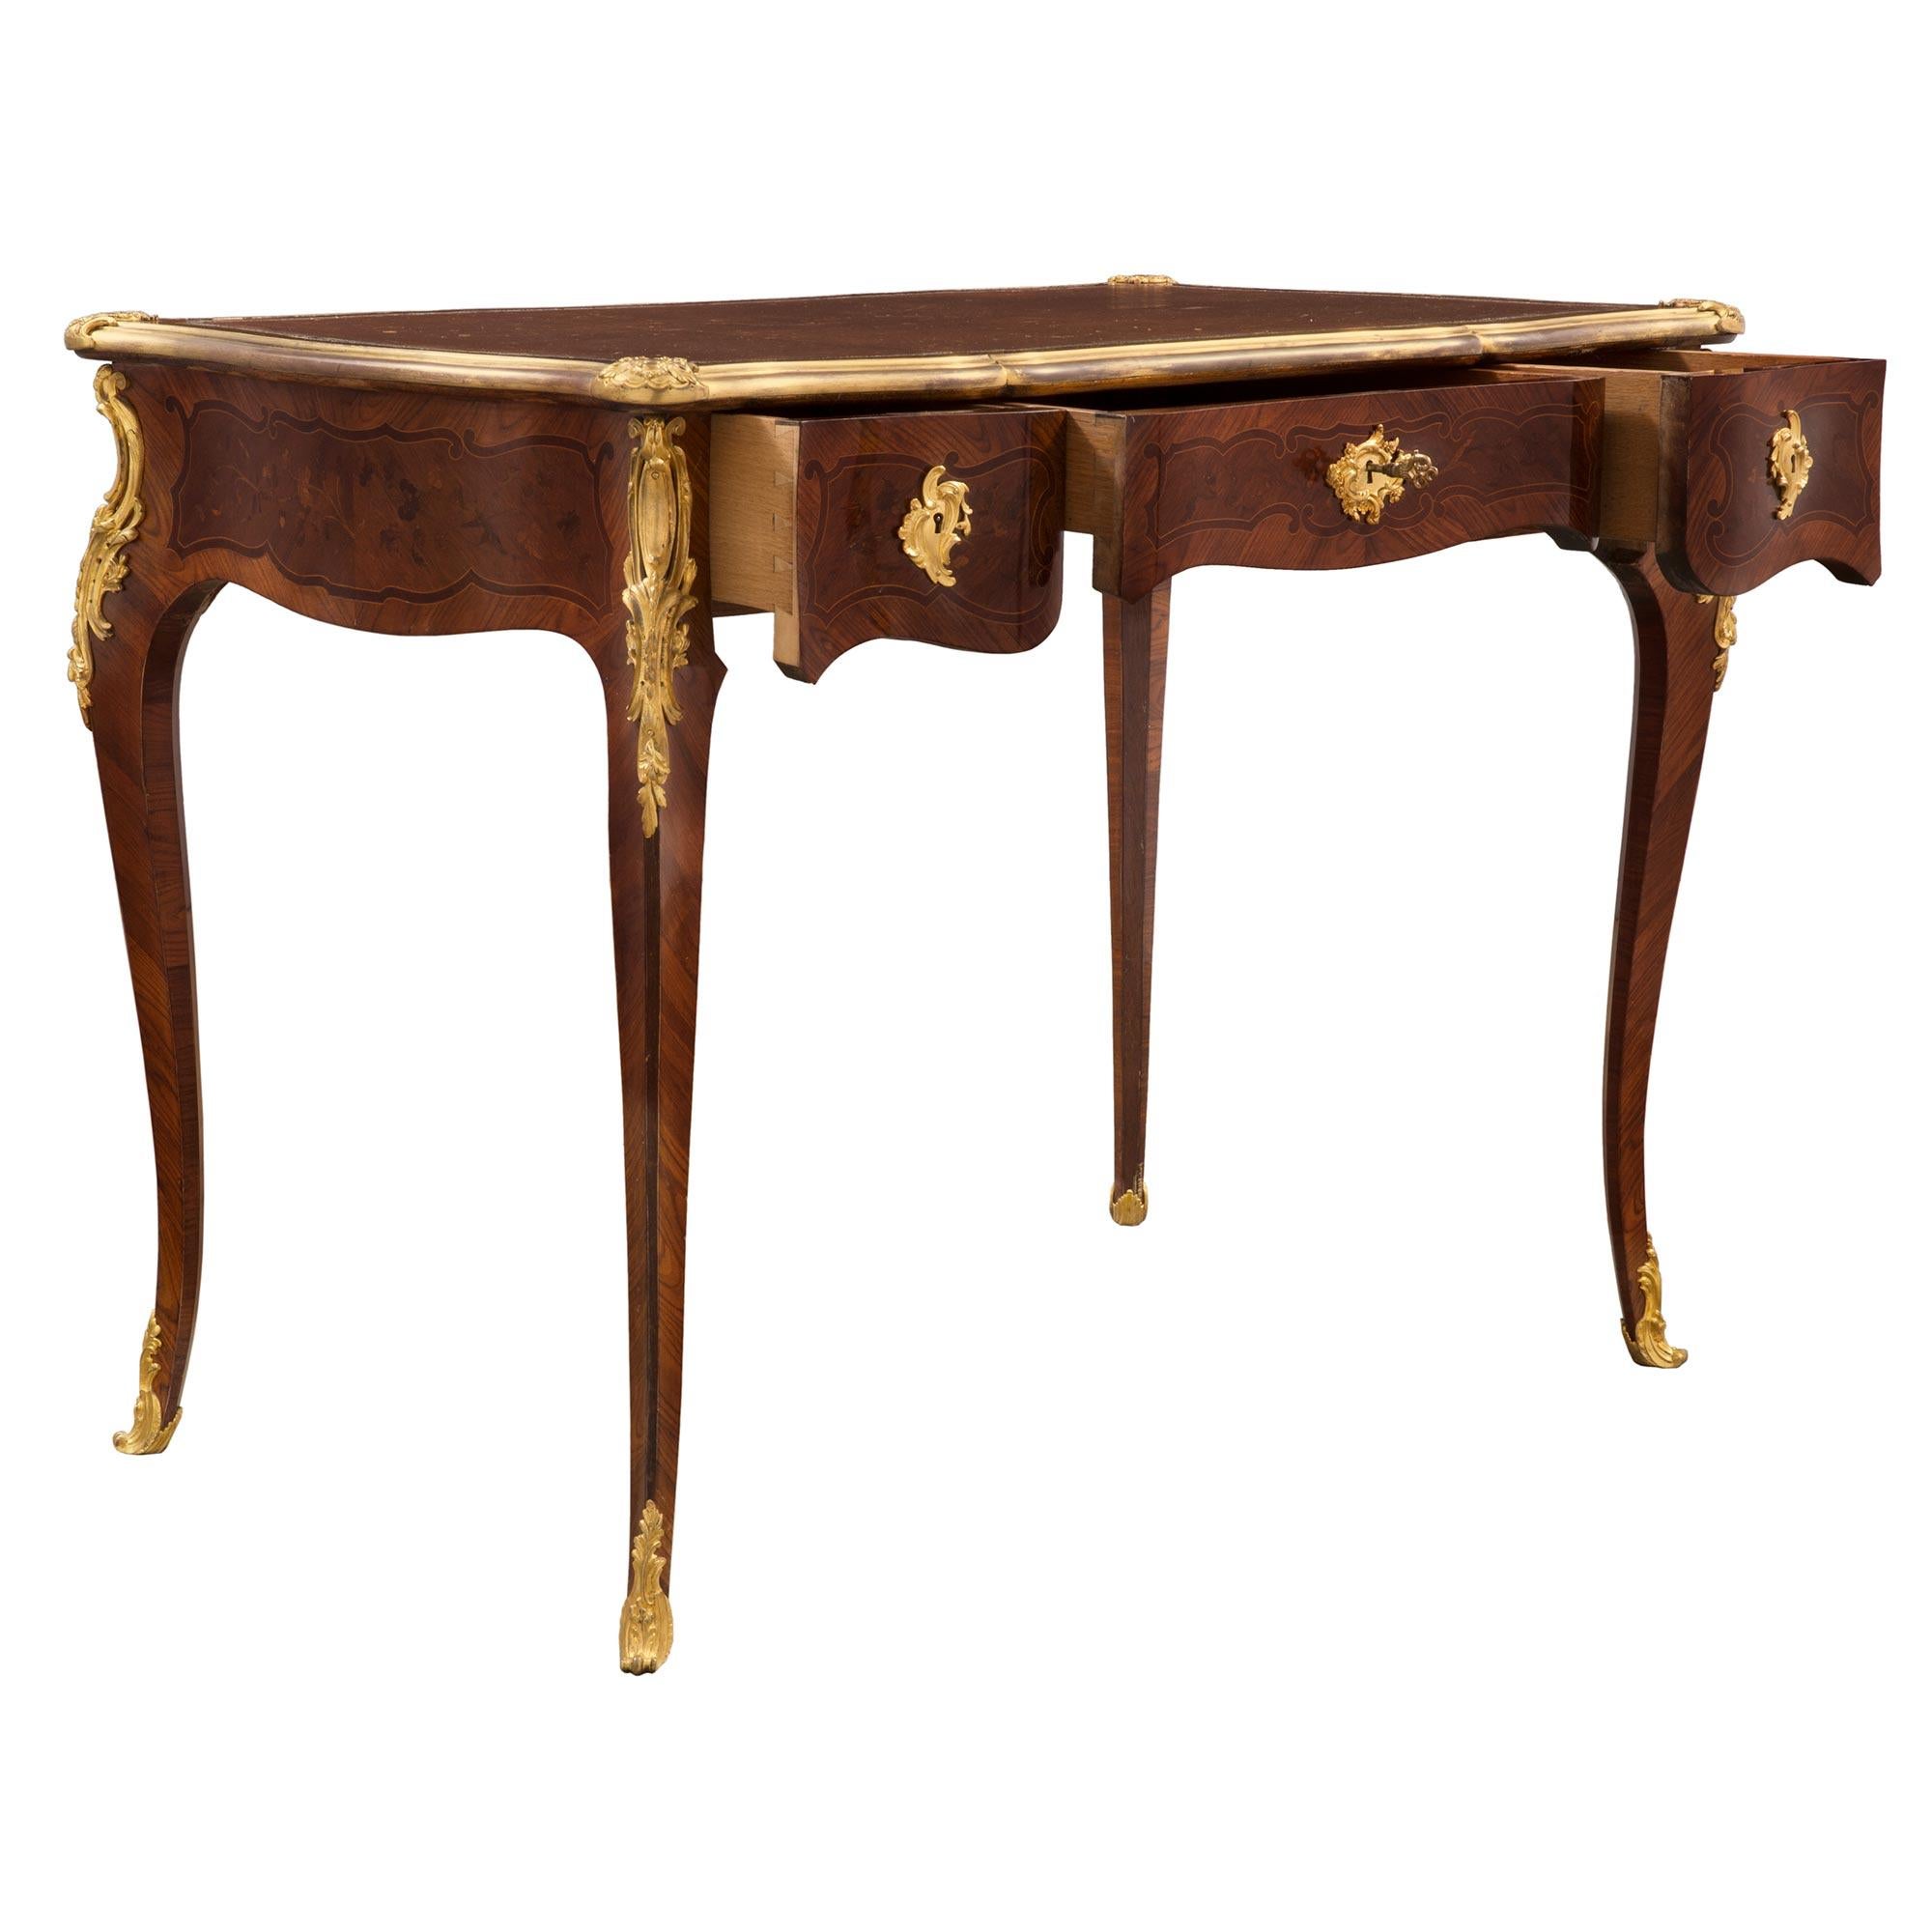 French 19th Century Louis XV Style Kingwood, Tulipwood, Ormolu and Leather Desk For Sale 1